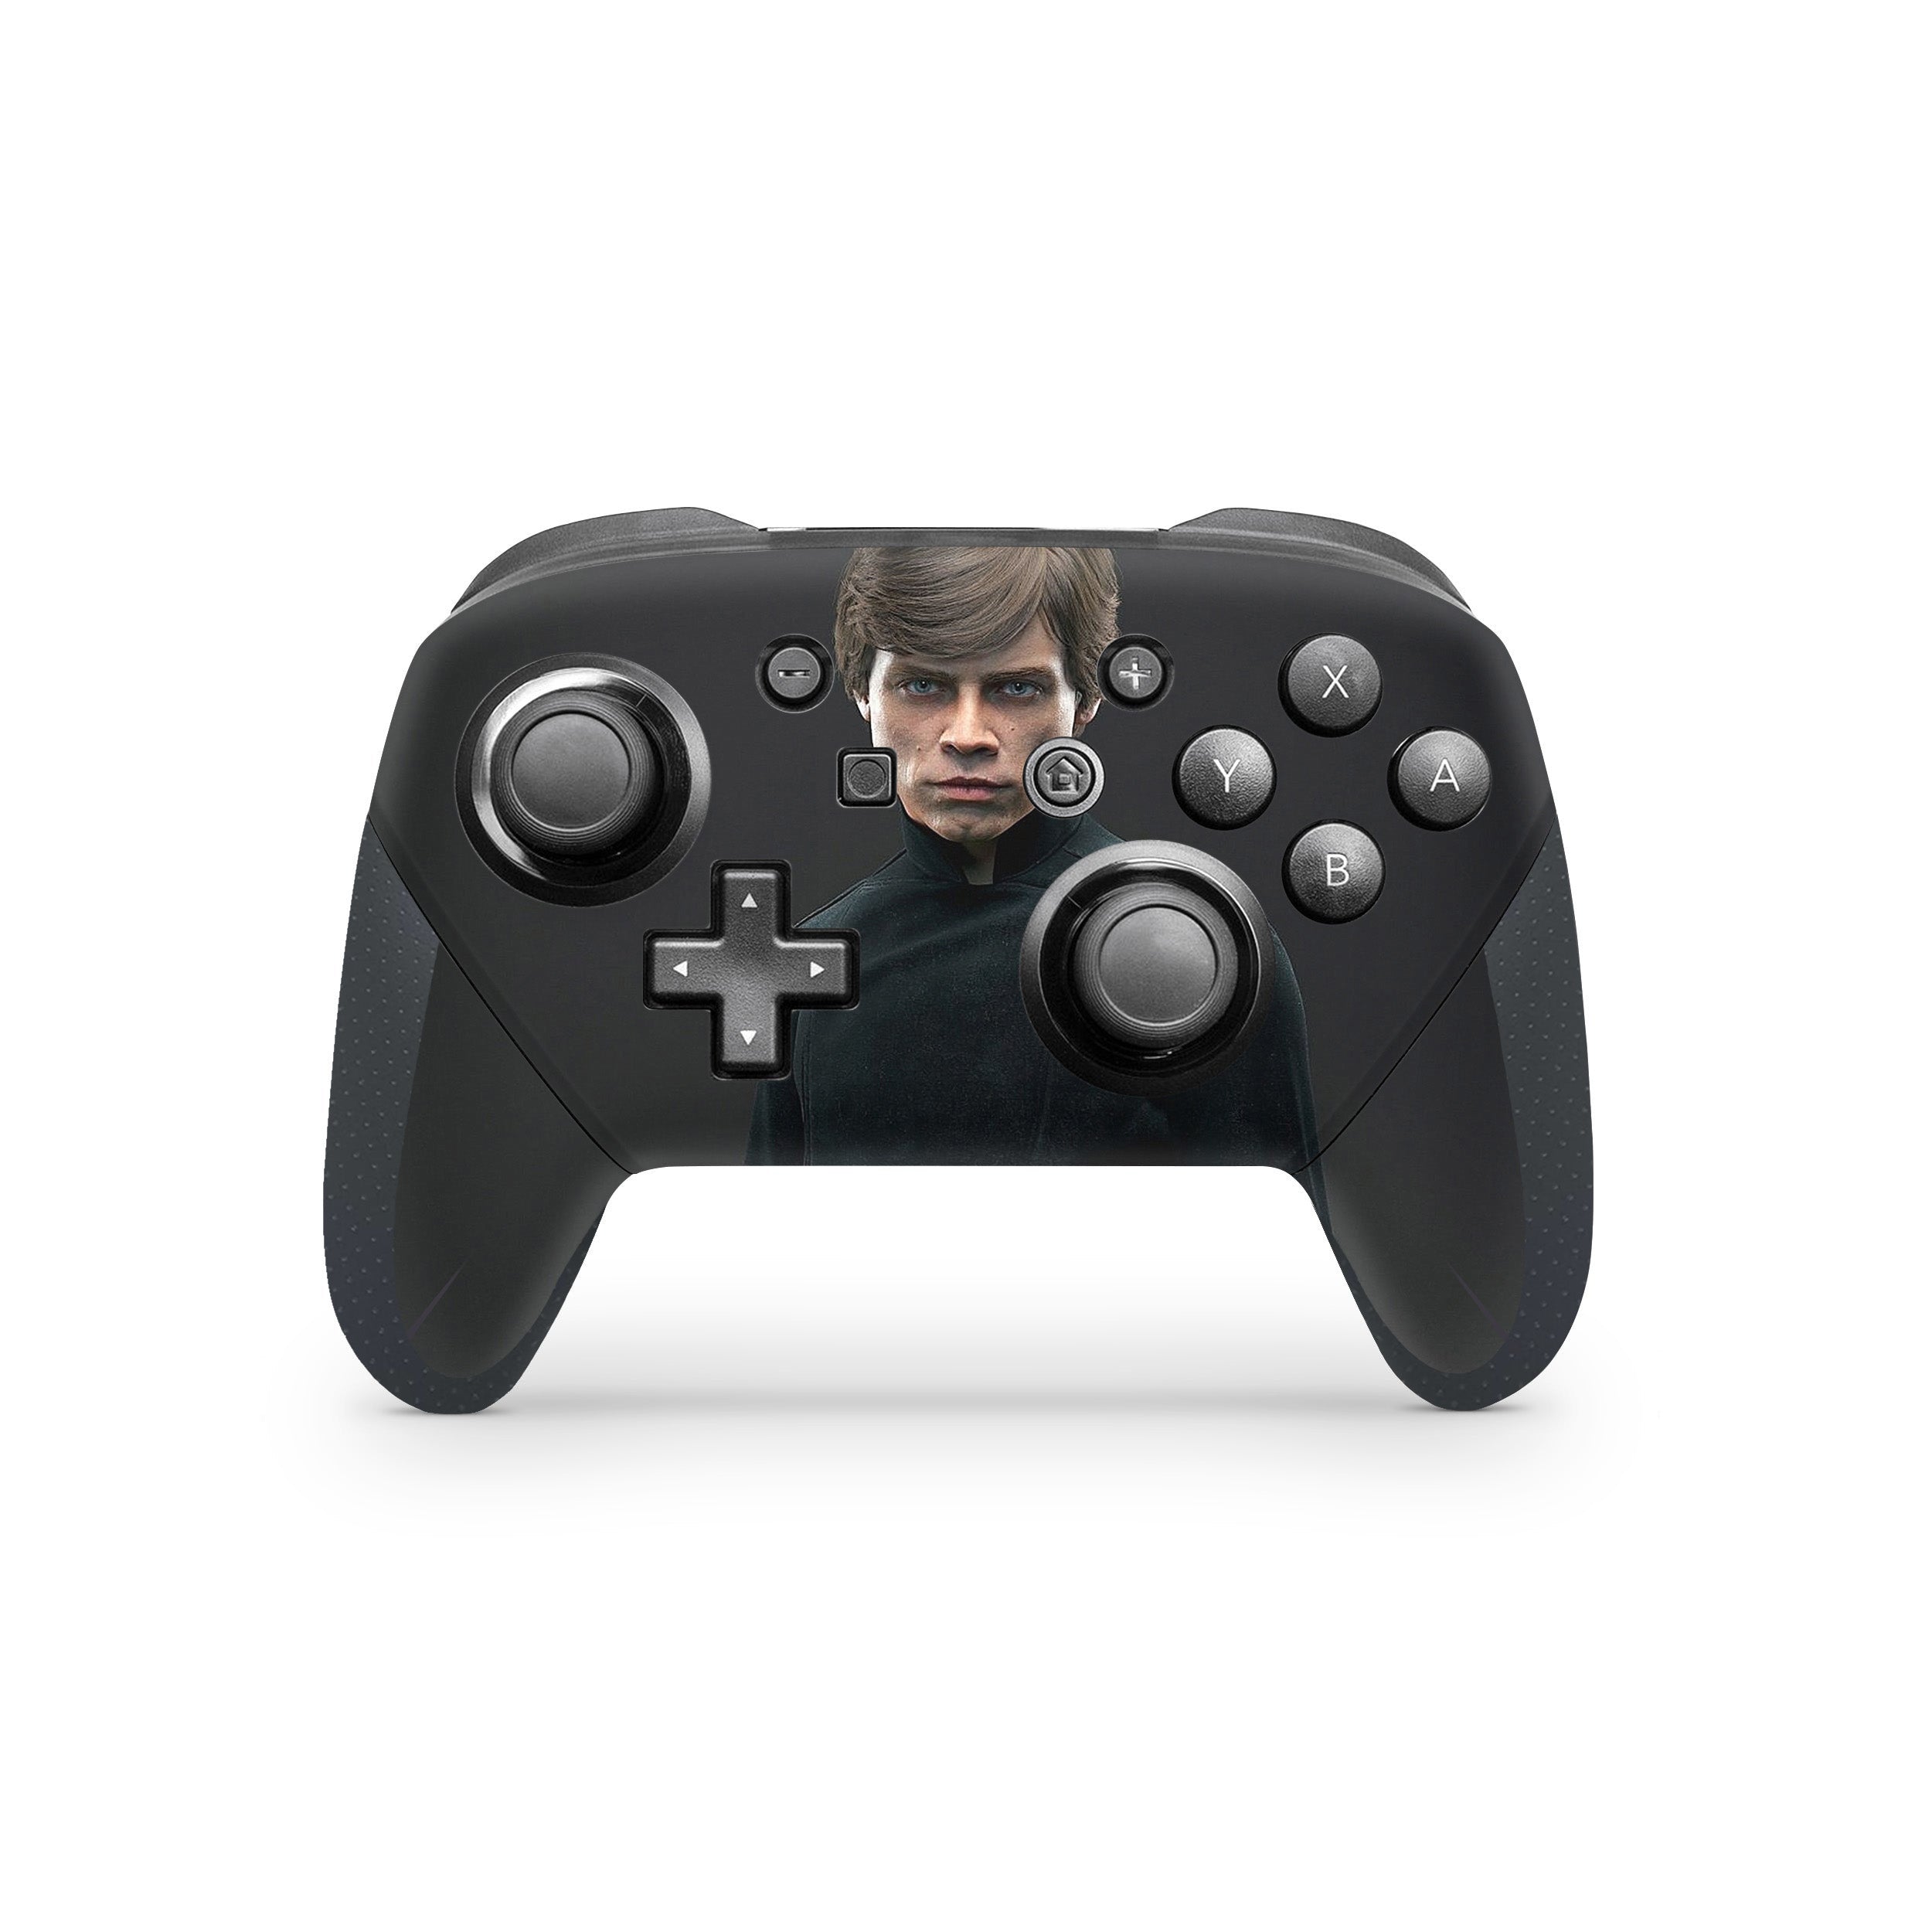 A video game skin featuring a Star Wars Luke Skywalker Rey design for the Switch Pro Controller.